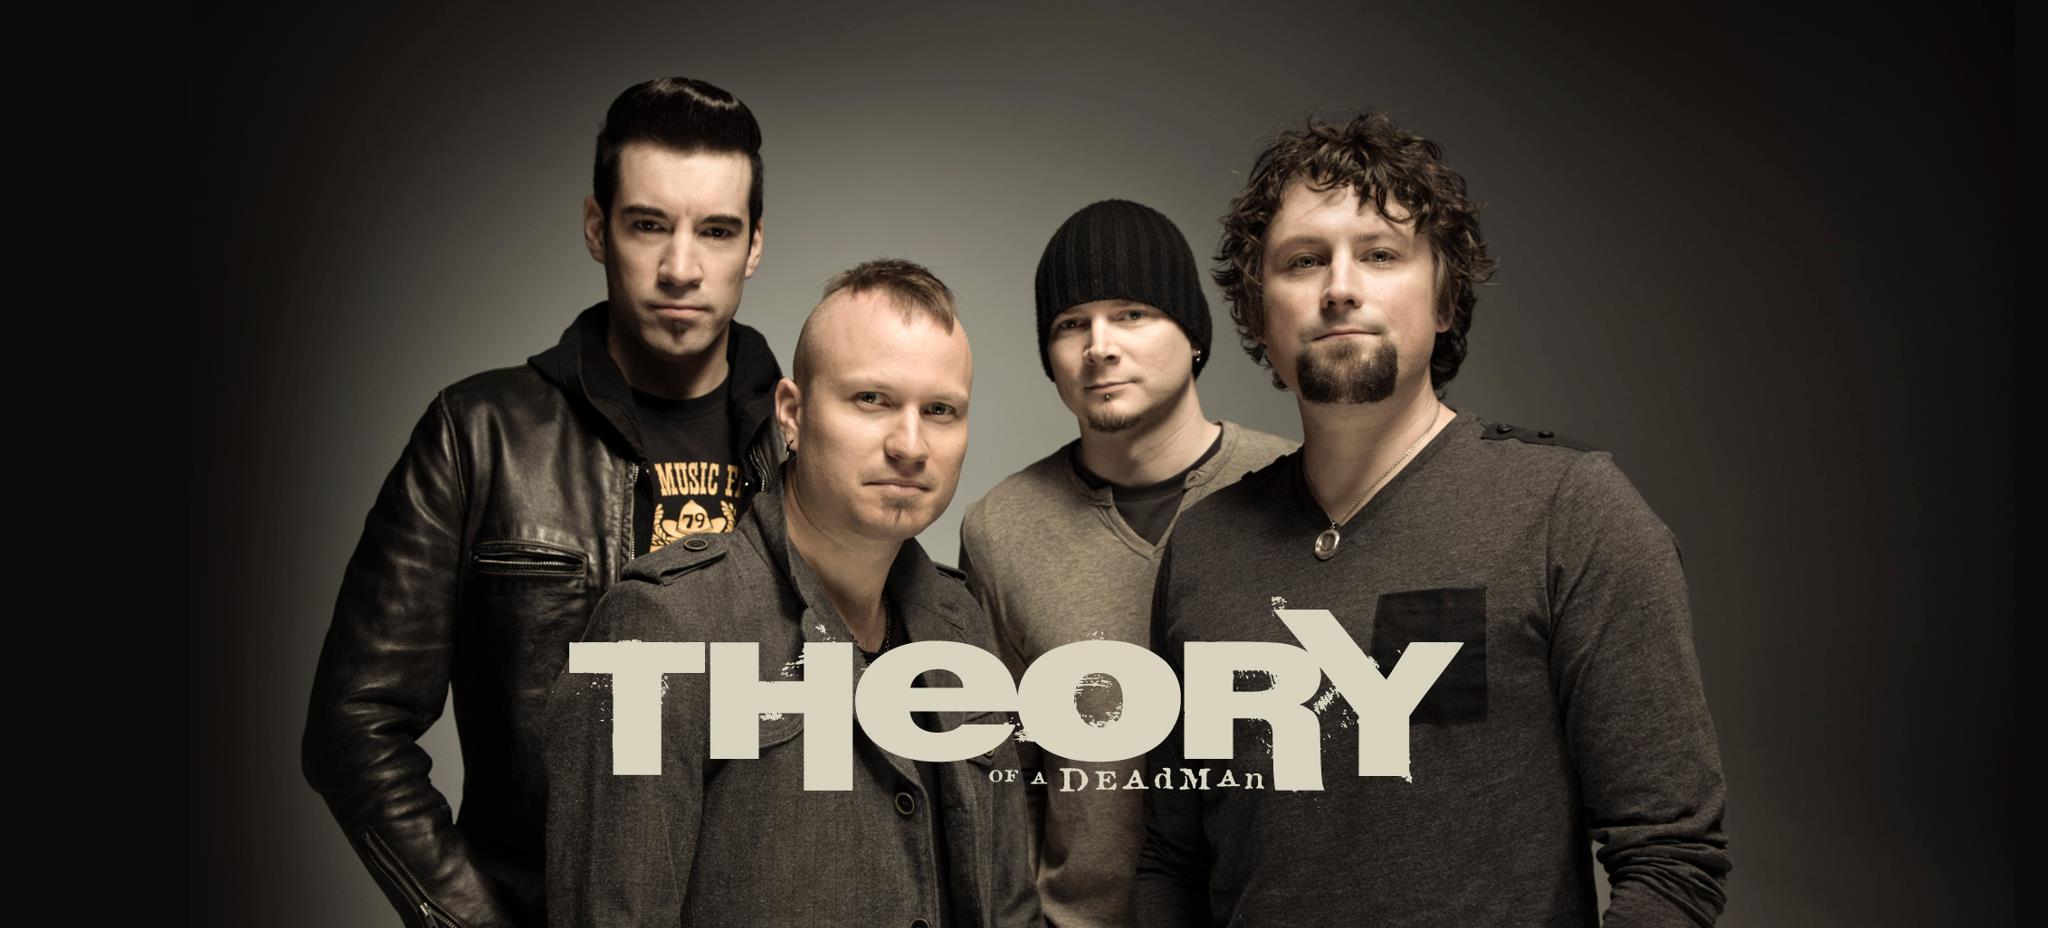 Gallery For Gt Theory Of A Deadman Band Wallpaper